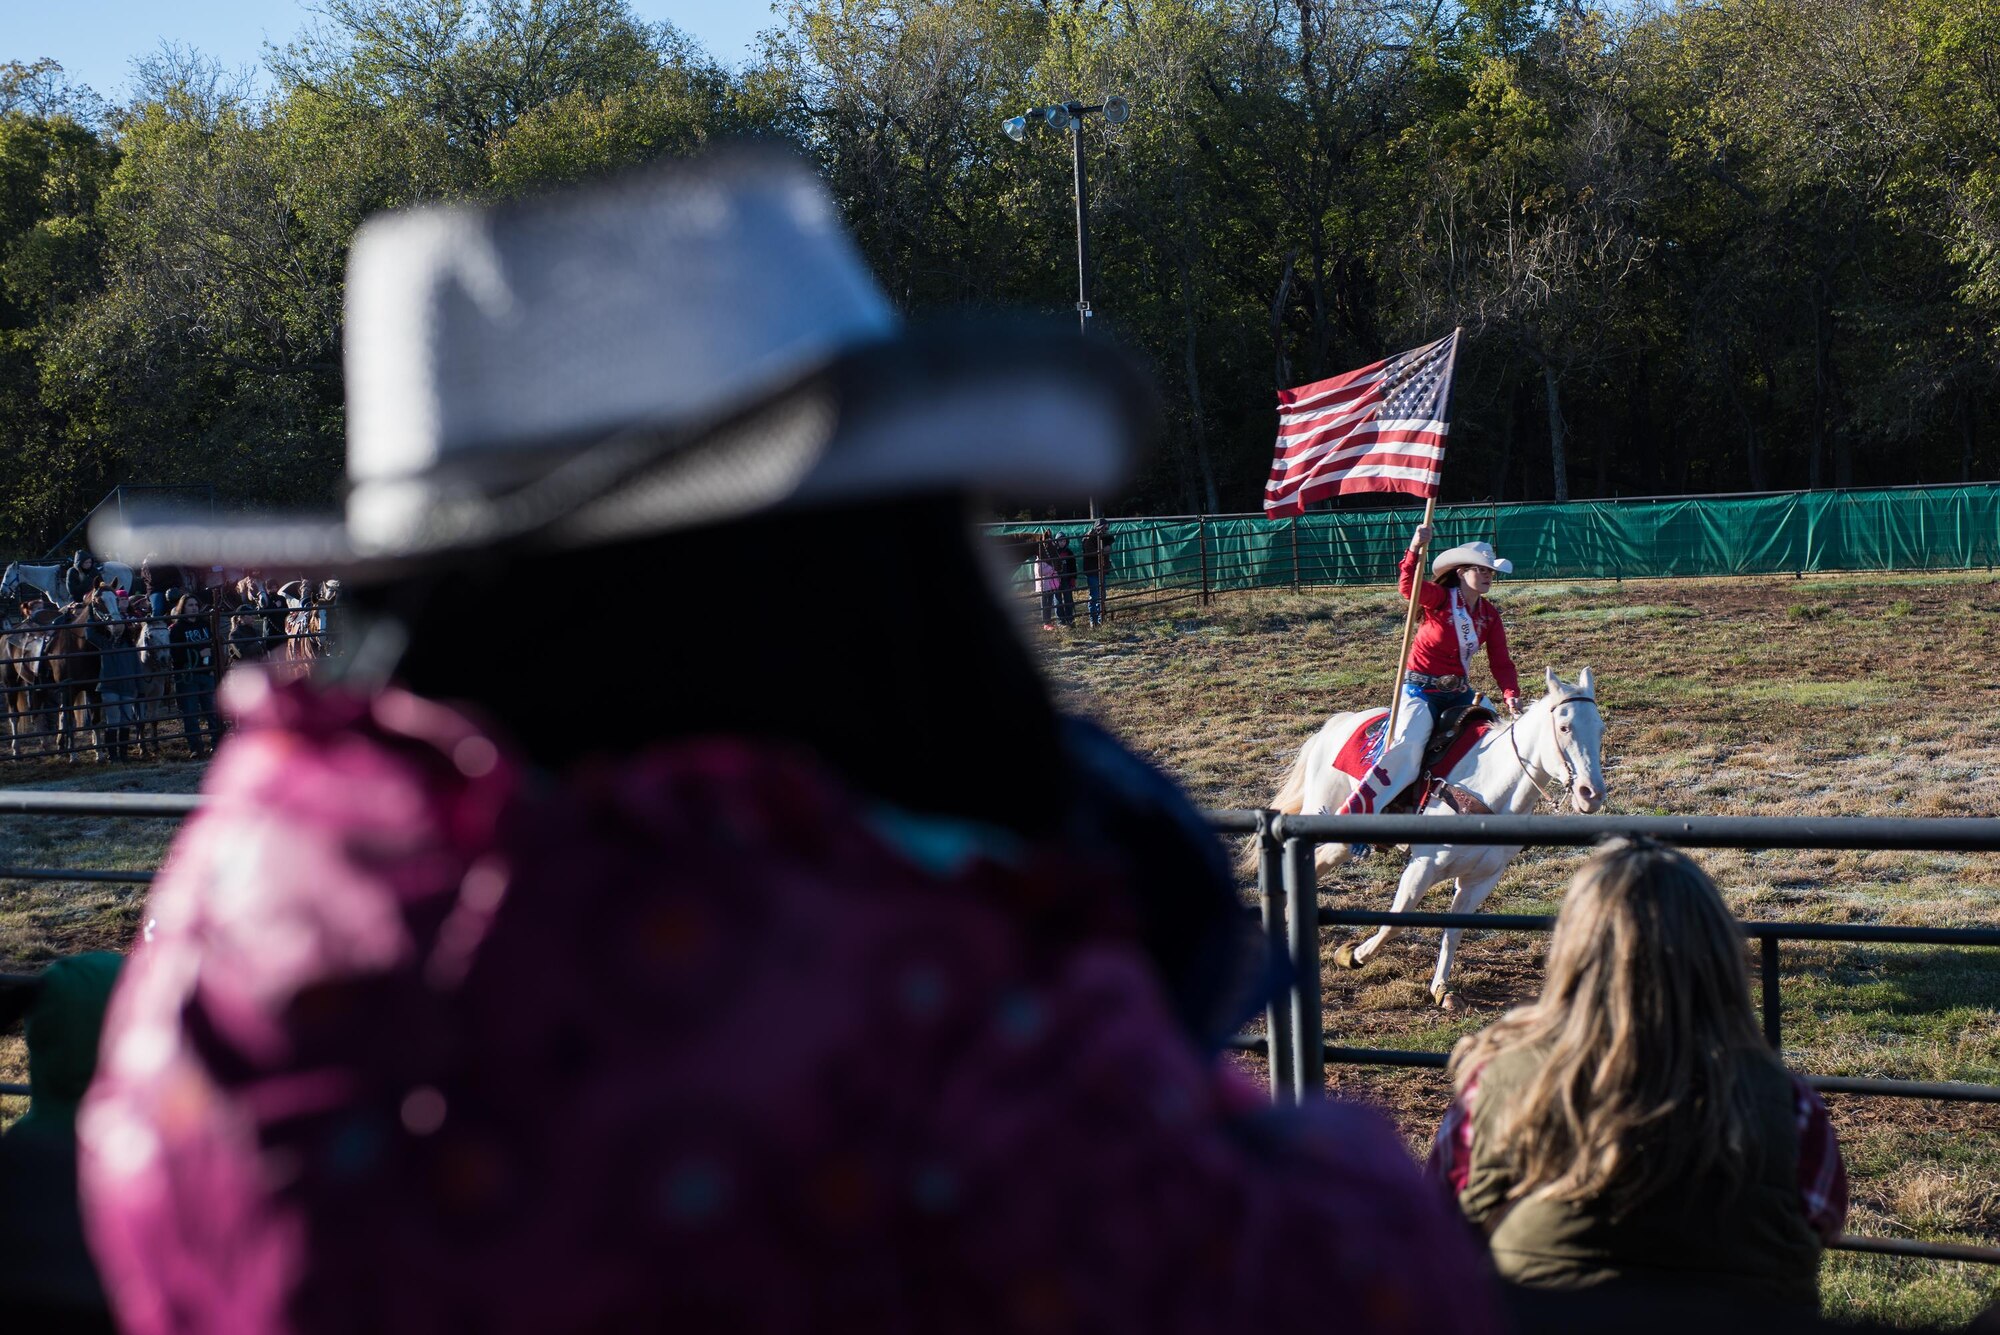 Kate Gibson, 2017 89ers Day Rodeo Princess, presents the U.S. Flag during the National Anthem at the opening of the 6th Annual Oklahoma National Guard Adjutant General’s Horseback Heroes event, Oct. 28, 2017, at Covey Creek Ranch in Oklahoma City. Horseback Heroes is conducted each fall for military children to show support to the families of Guardsmen, especially those who are deployed. (U.S. Air National Guard photo by Staff Sgt. Kasey M. Phipps/Released)